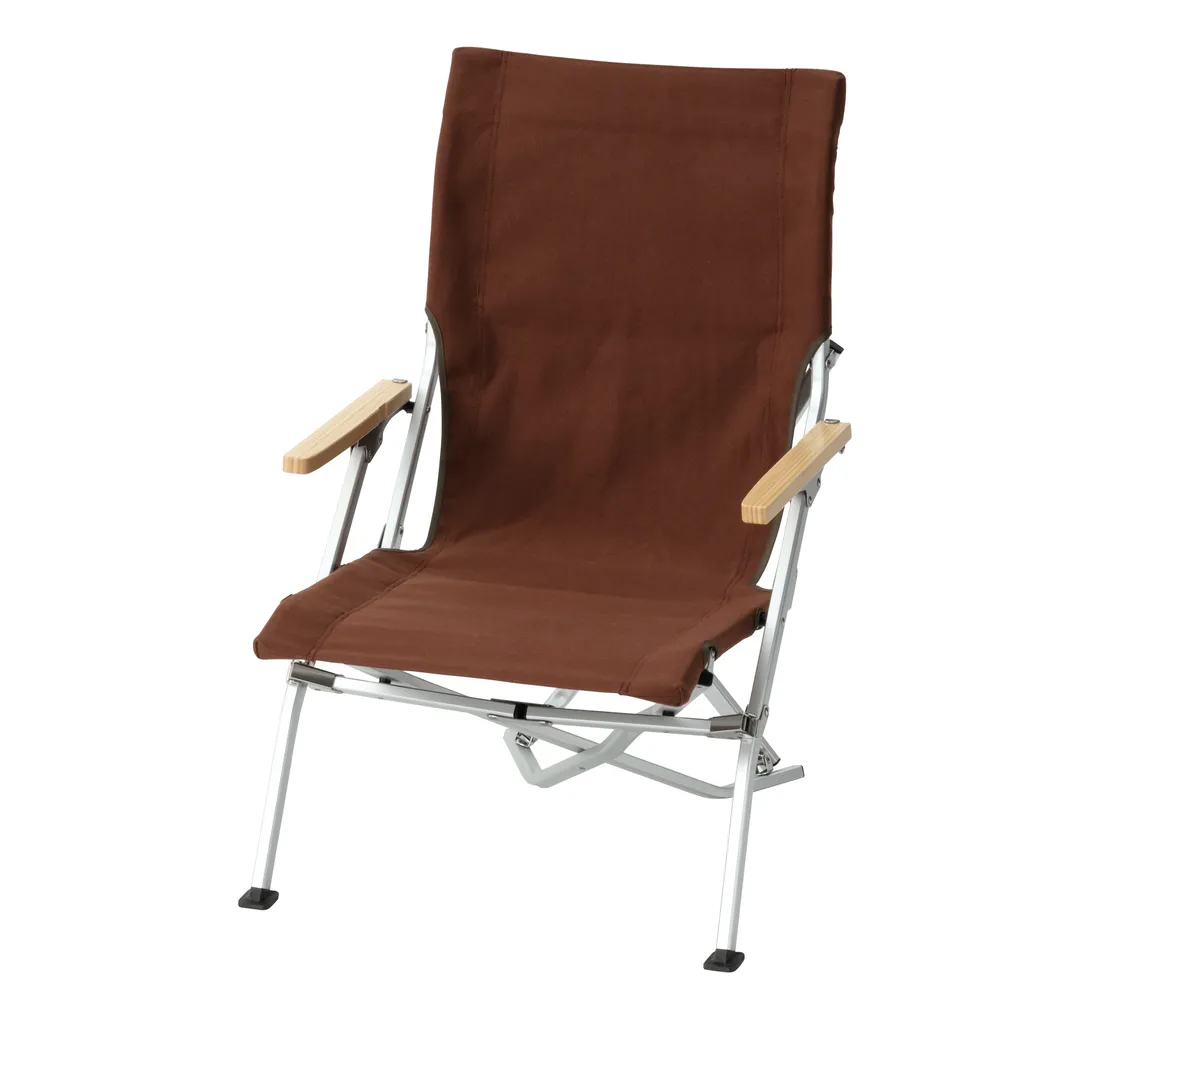 Stylish brown camping chair for glampers